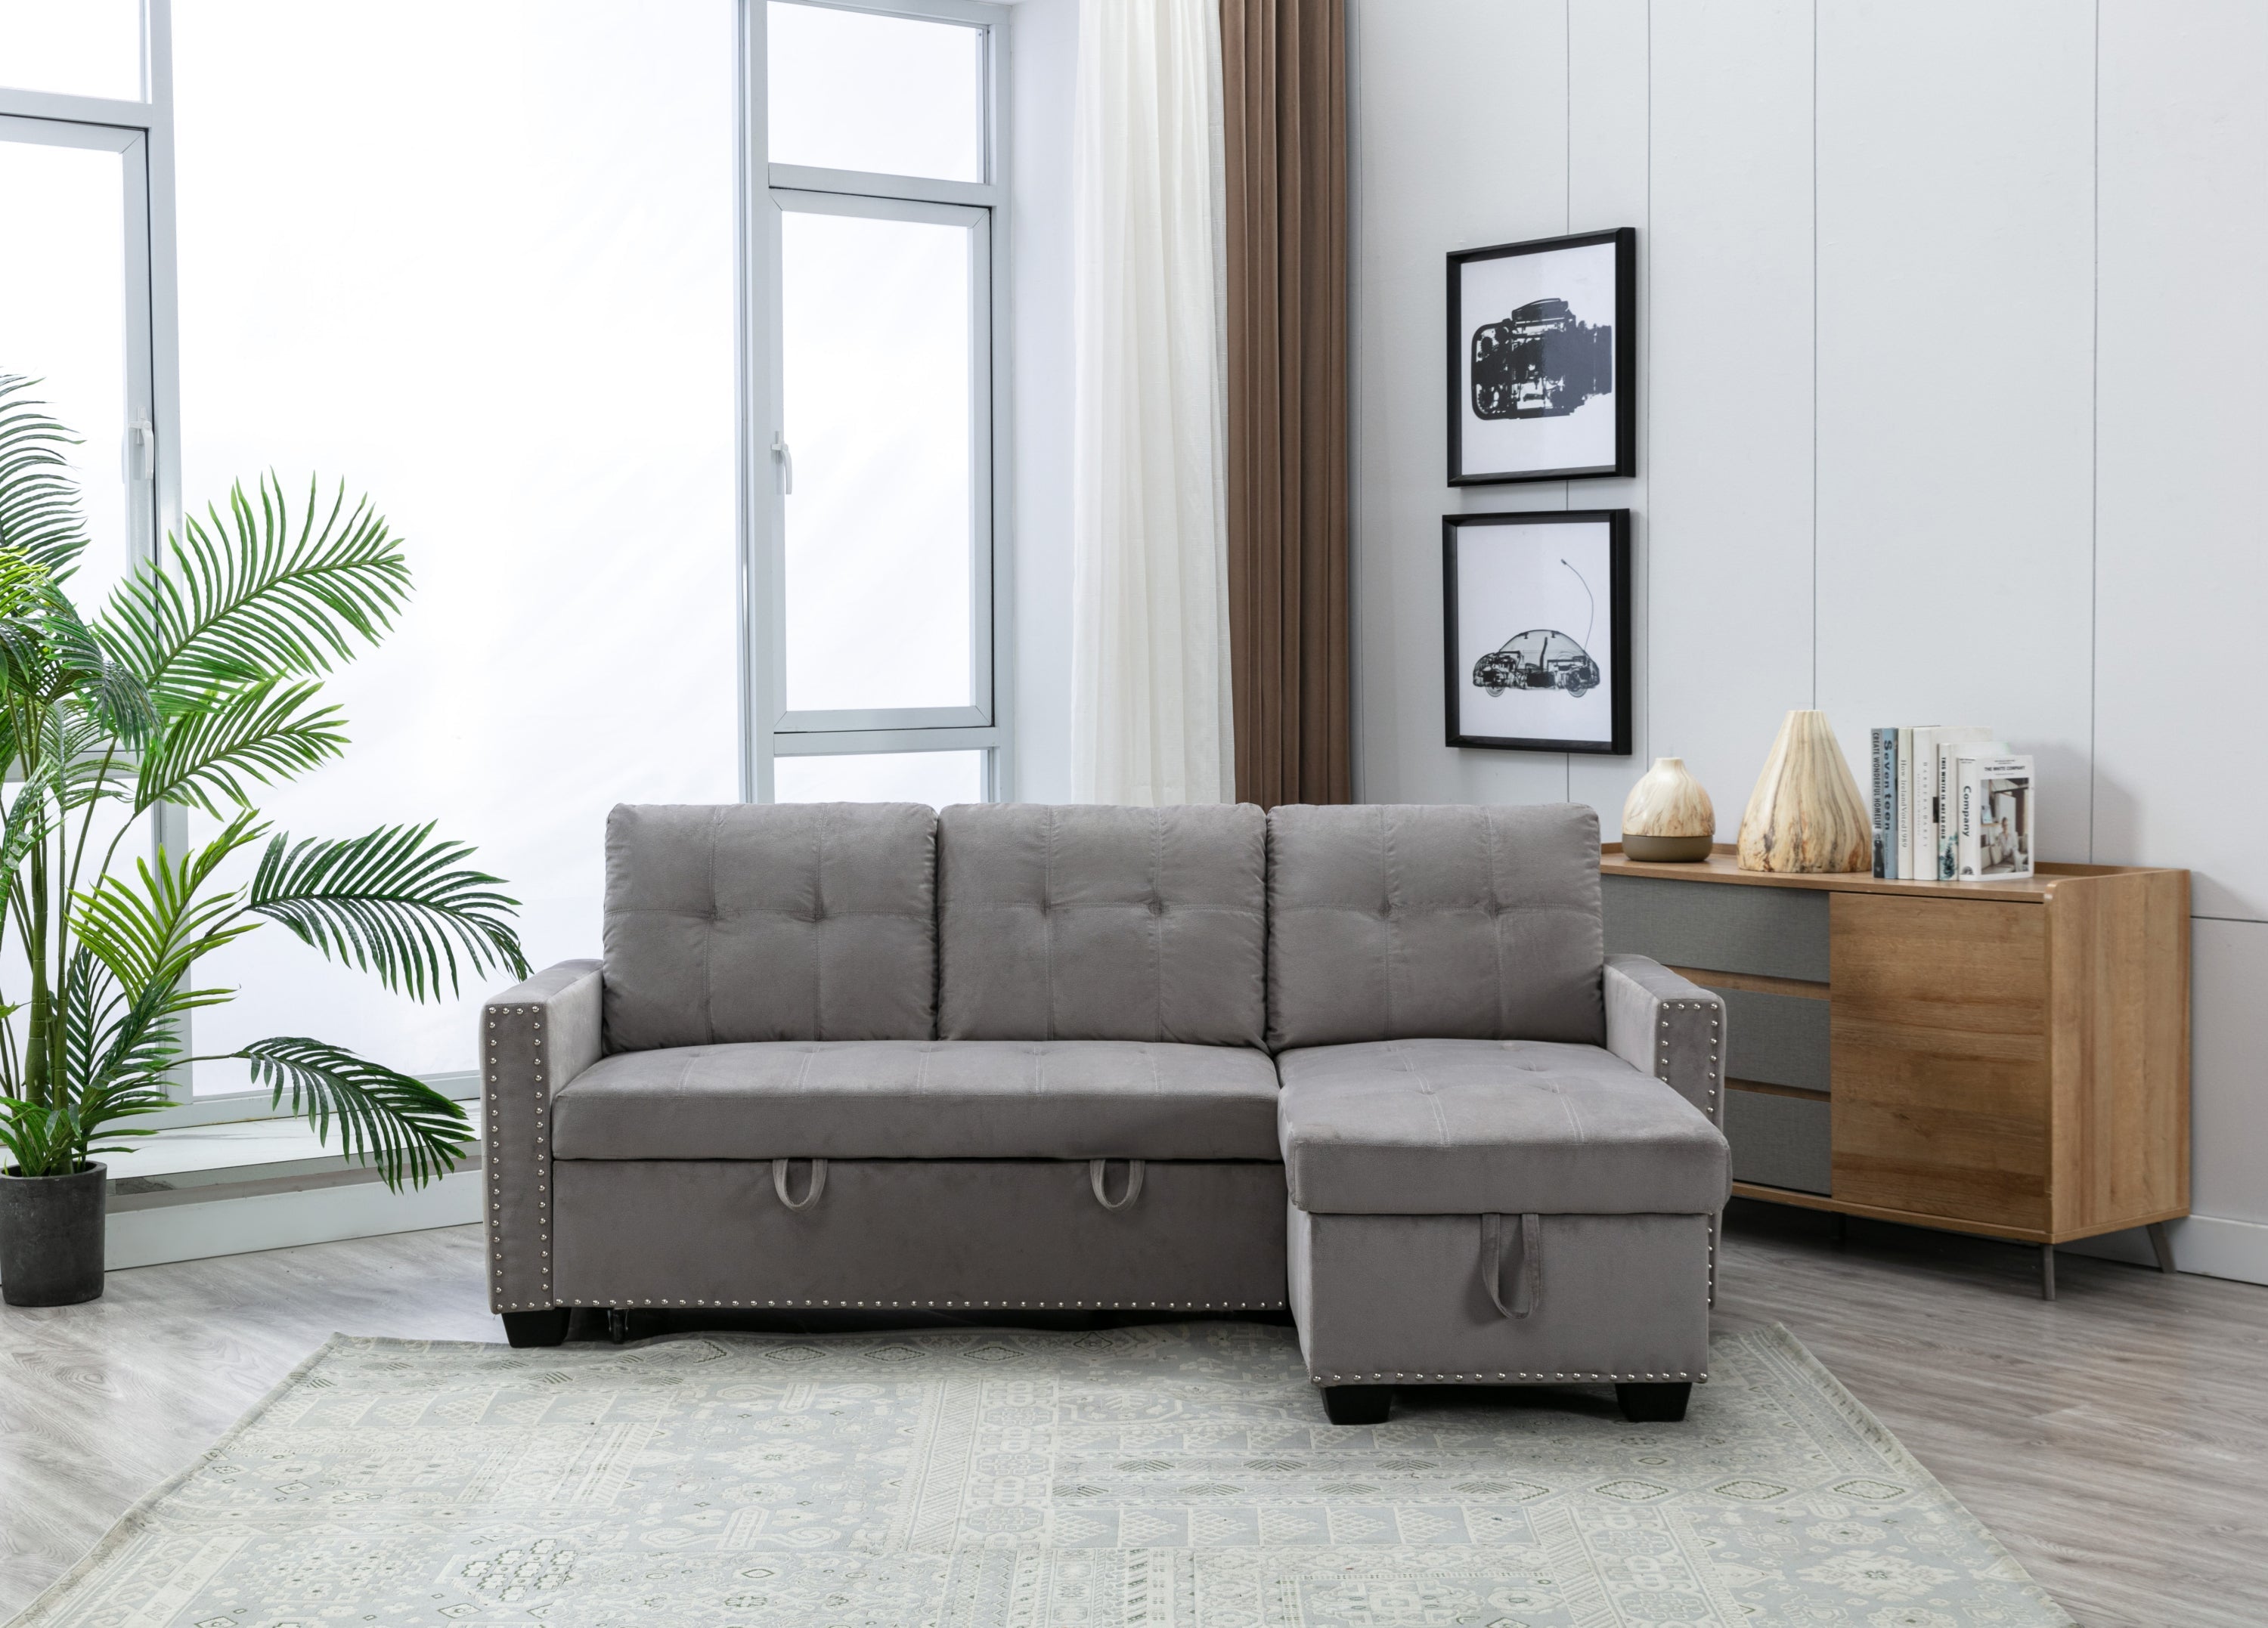 Reversible Sectional Storage Sleeper Sofa Bed | L-Shape 2 Seat Sectional Chaise With Storage | Skin-Feeling Velvet Fabric | Light Grey Color | Stylish Addition to Living Room Furniture-Sleeper Sectionals-American Furniture Outlet